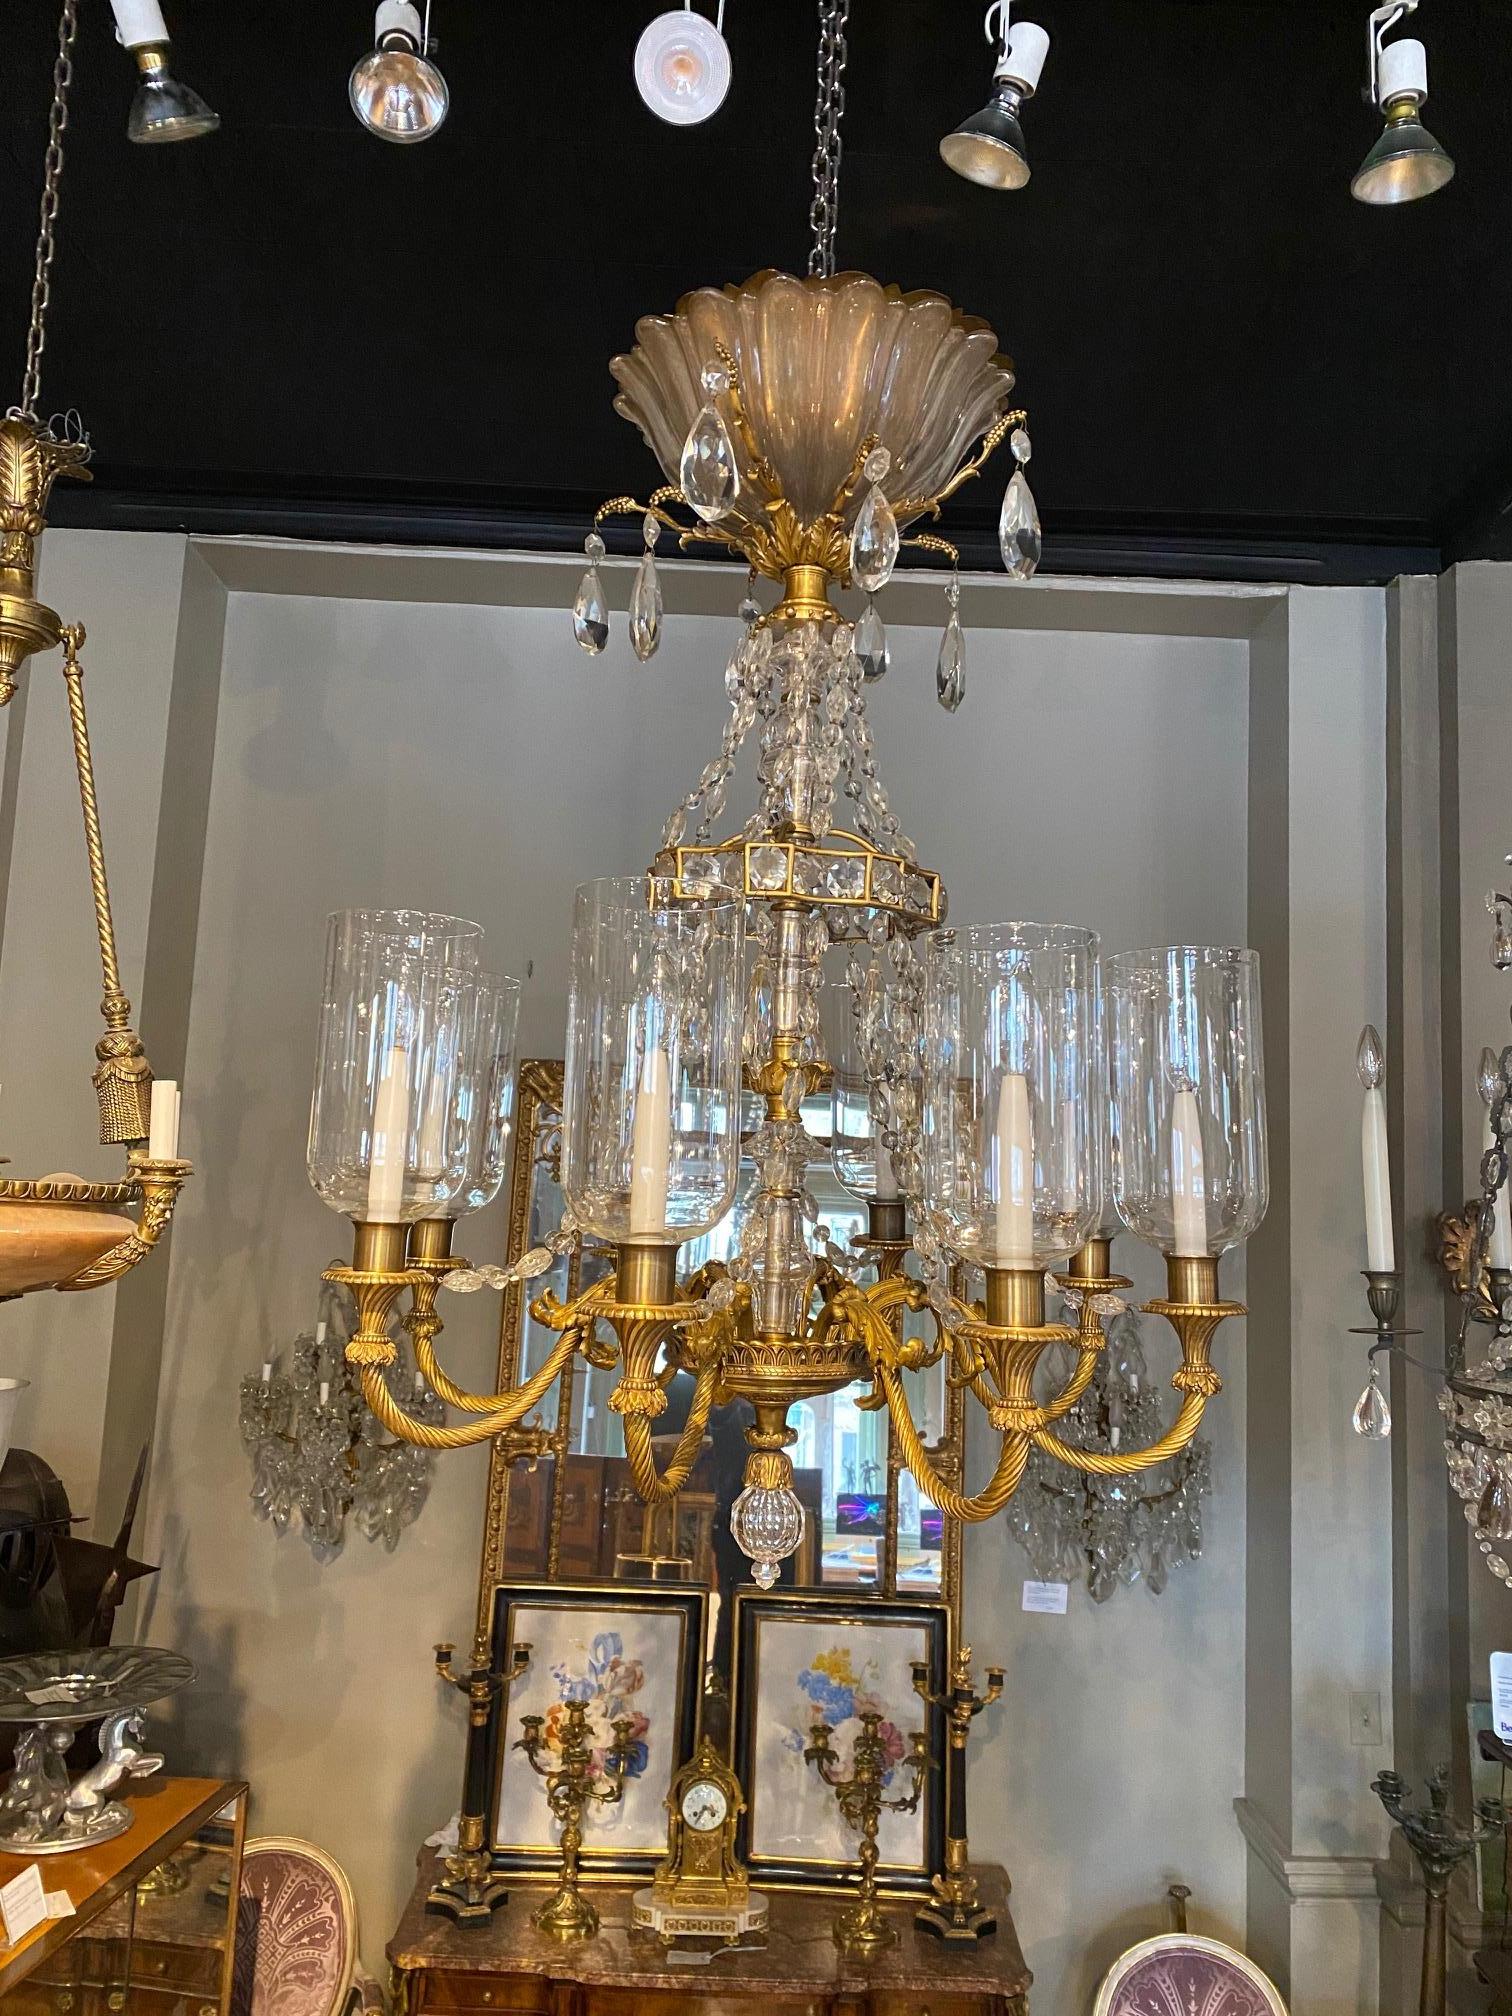 Very fine Louis XVI style gilt bronze and crystal  8 light chandelier by Maison Baguès.
The  cast bronze structure is  gilt with a soft matt gilding and finely chased, featuring acanthus, grappes and wine leaves, each light is fitted with a glass